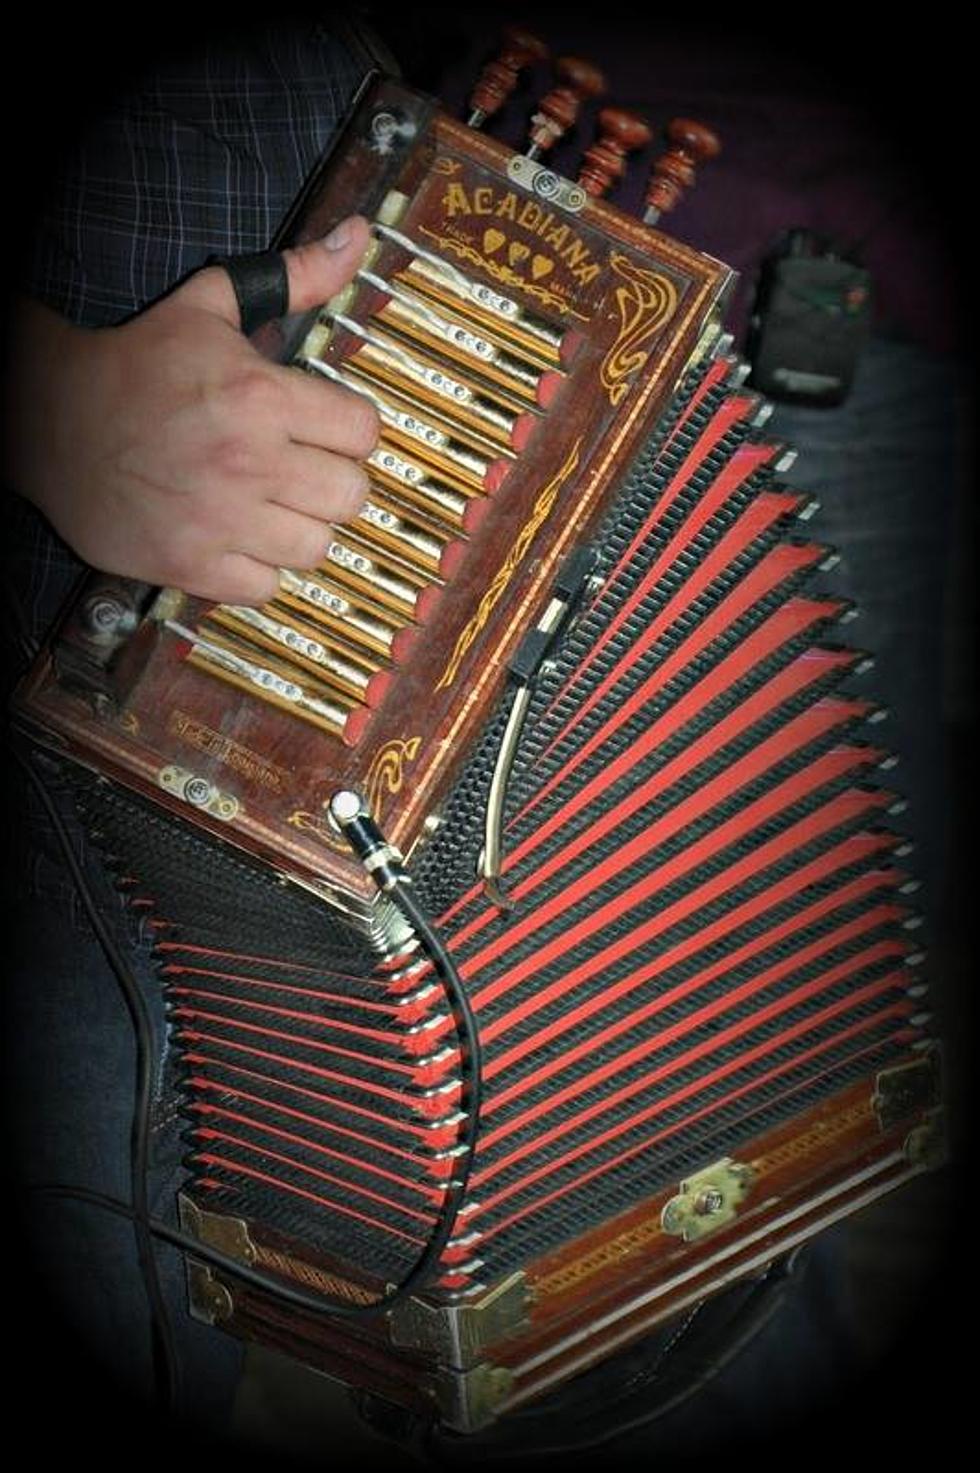 35th Annual Cajun Music & Food Festival Set For July 16-17 In Lake Charles